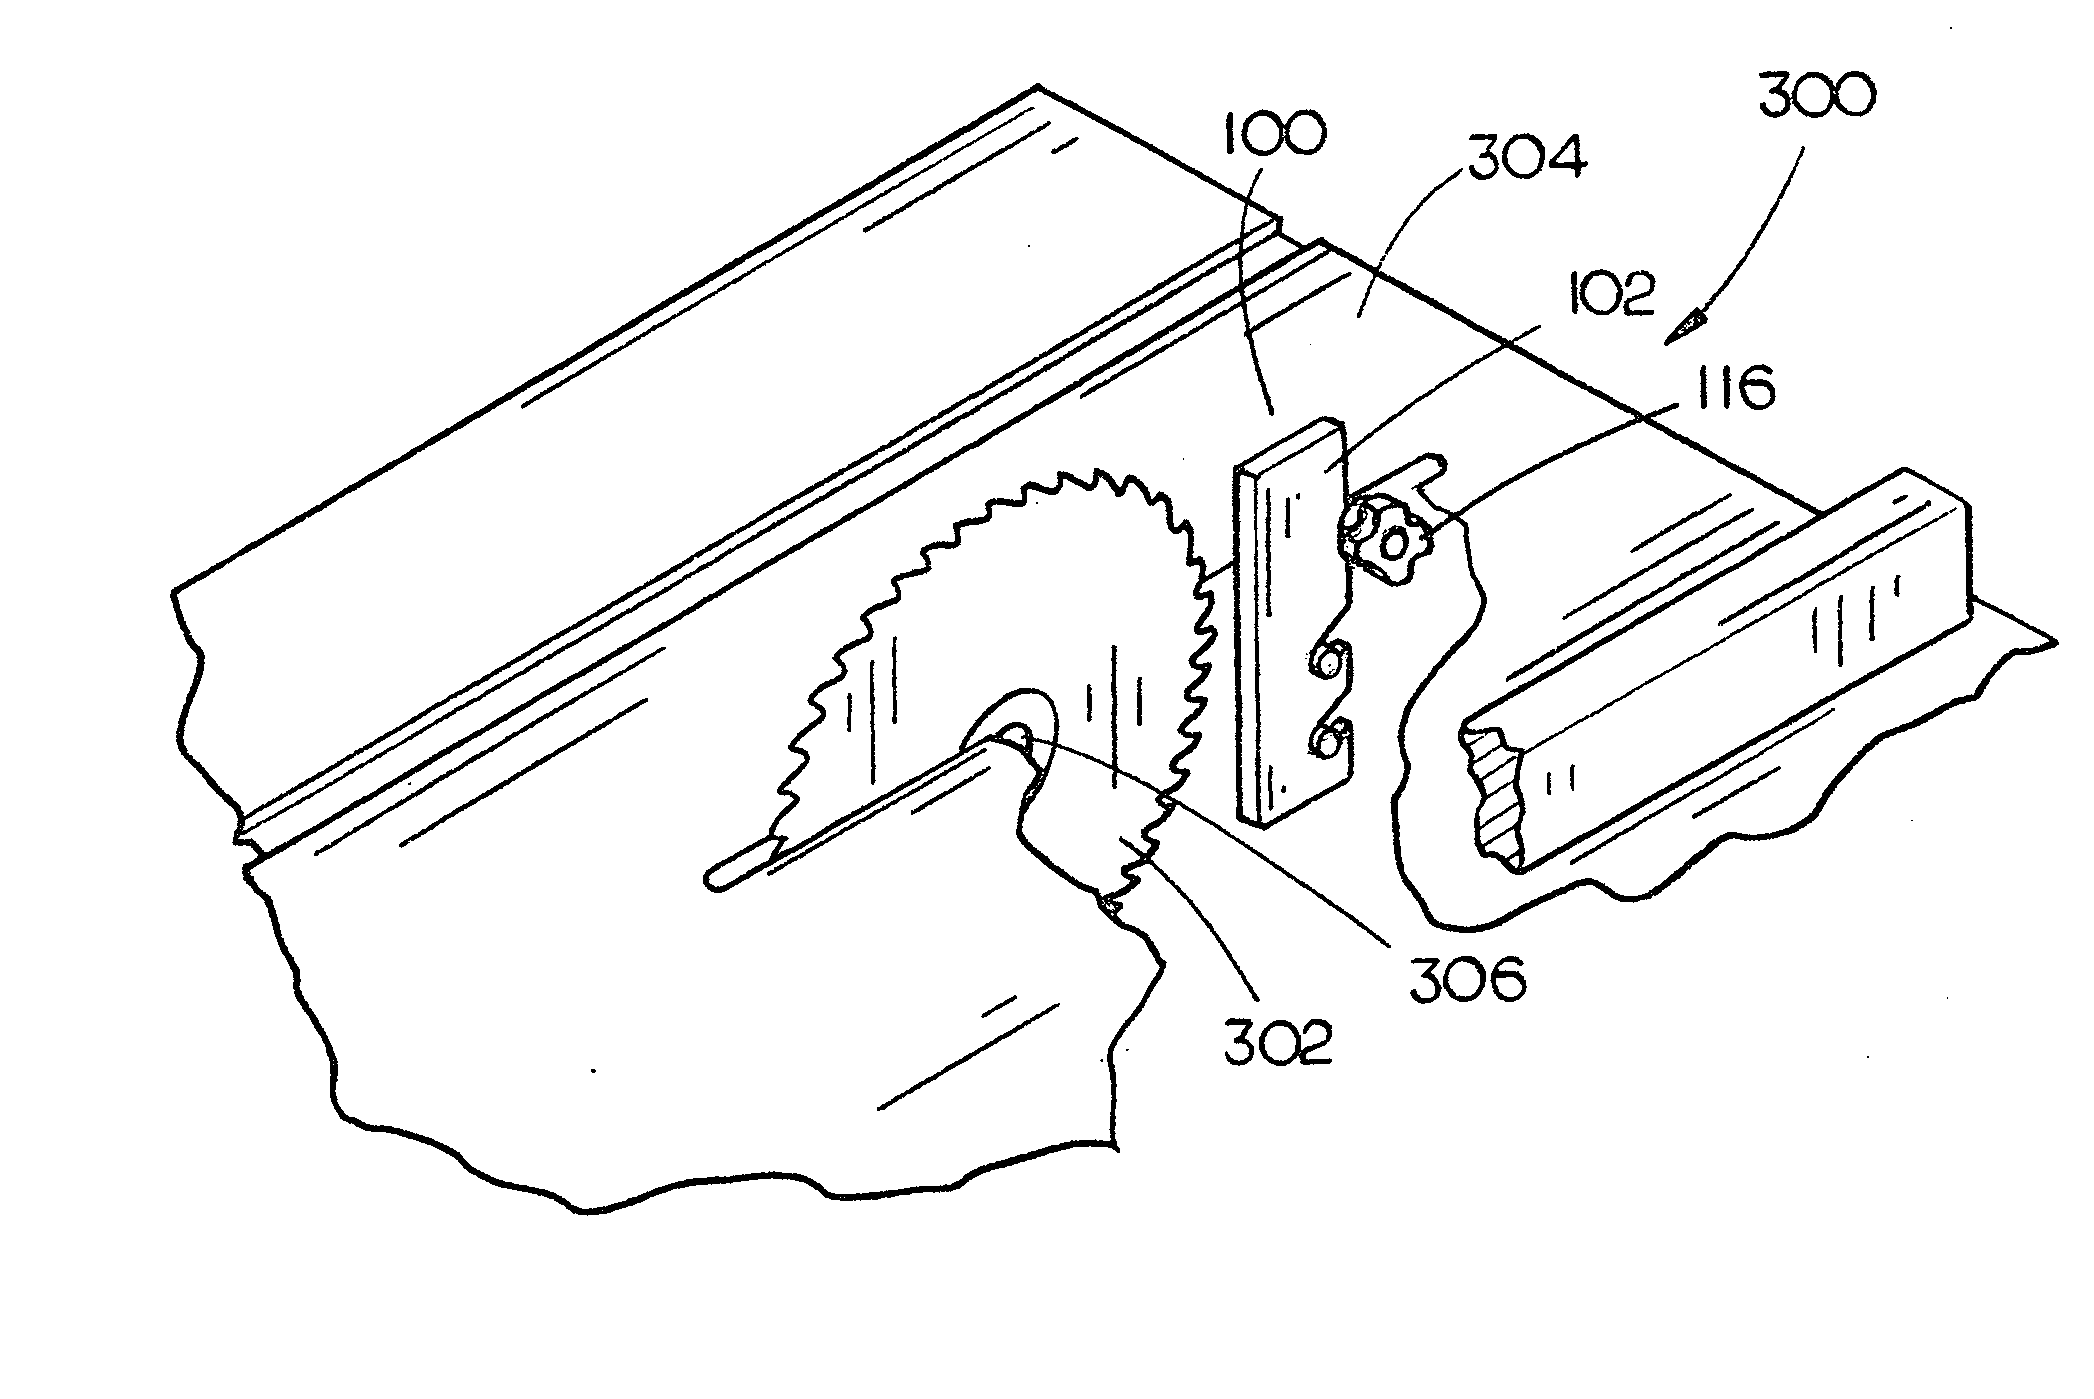 Riving knife assembly